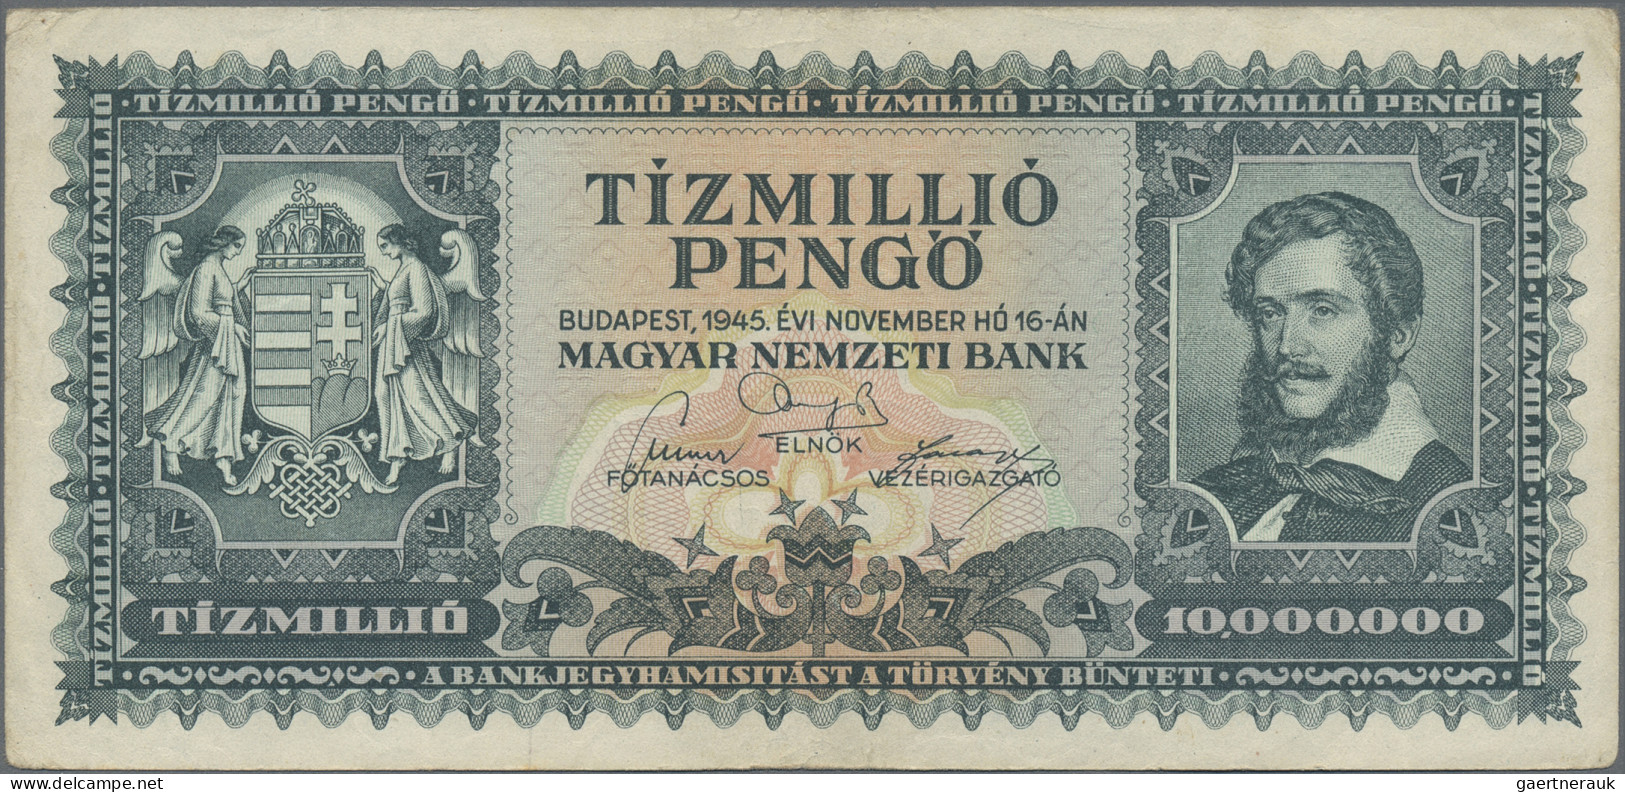 Hungary: Hungary, Inflation Lot With 13 Banknotes 1945-1946 Series, 500 Pengö – - Ungheria